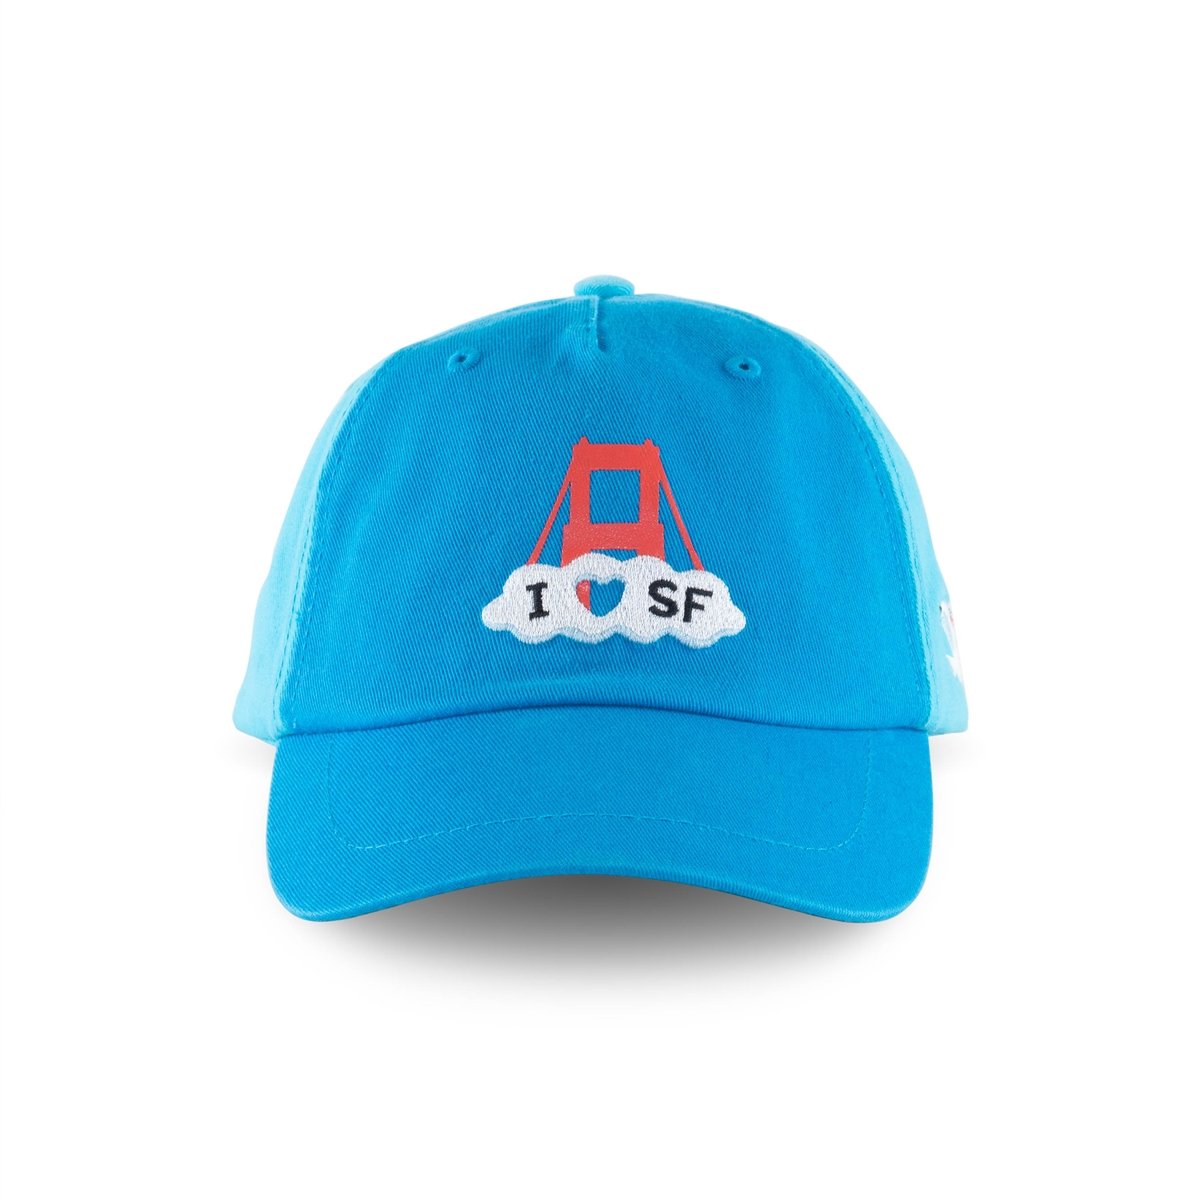 Light blue kids baseball cap with screen-printed and embroidered I Heart San Francisco and Golden Gate Bridge design details.